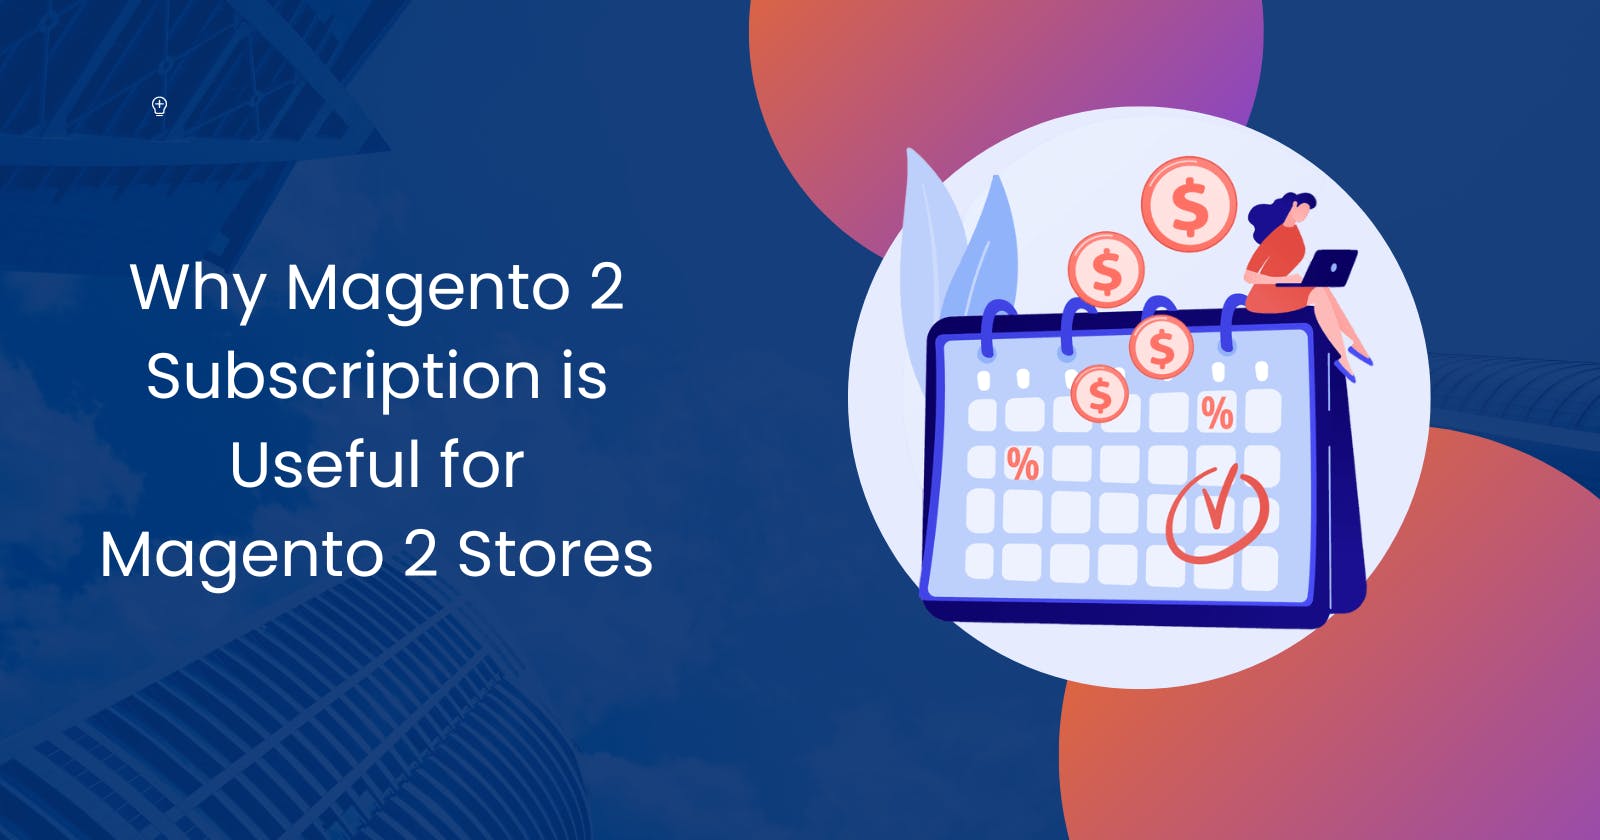 Why Magento 2 Subscription is Useful for Magento 2 Stores